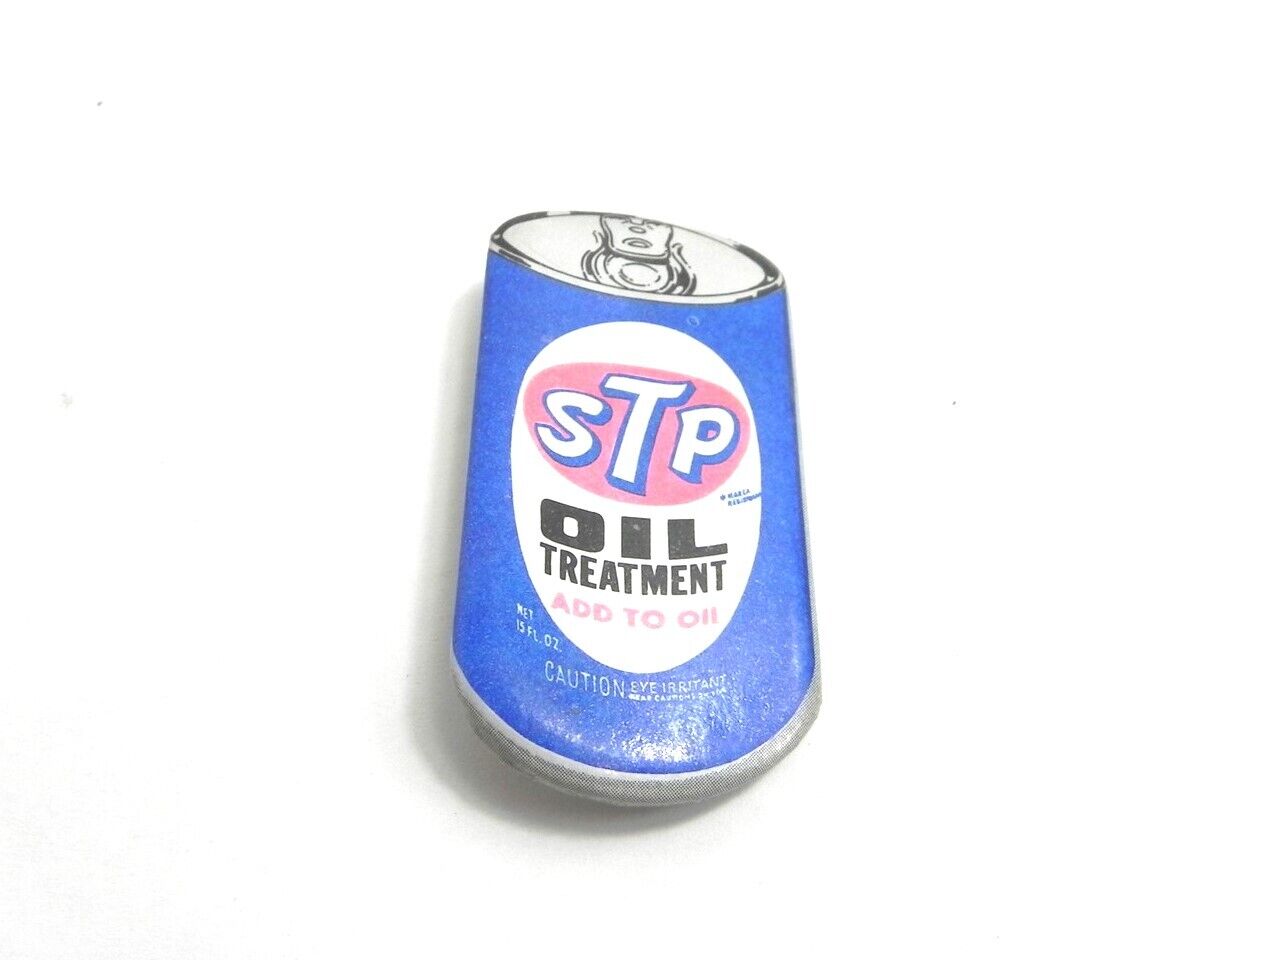 VINTAGE STP OIL TREATMENT PIN BUTTON *PRE-OWNED* 